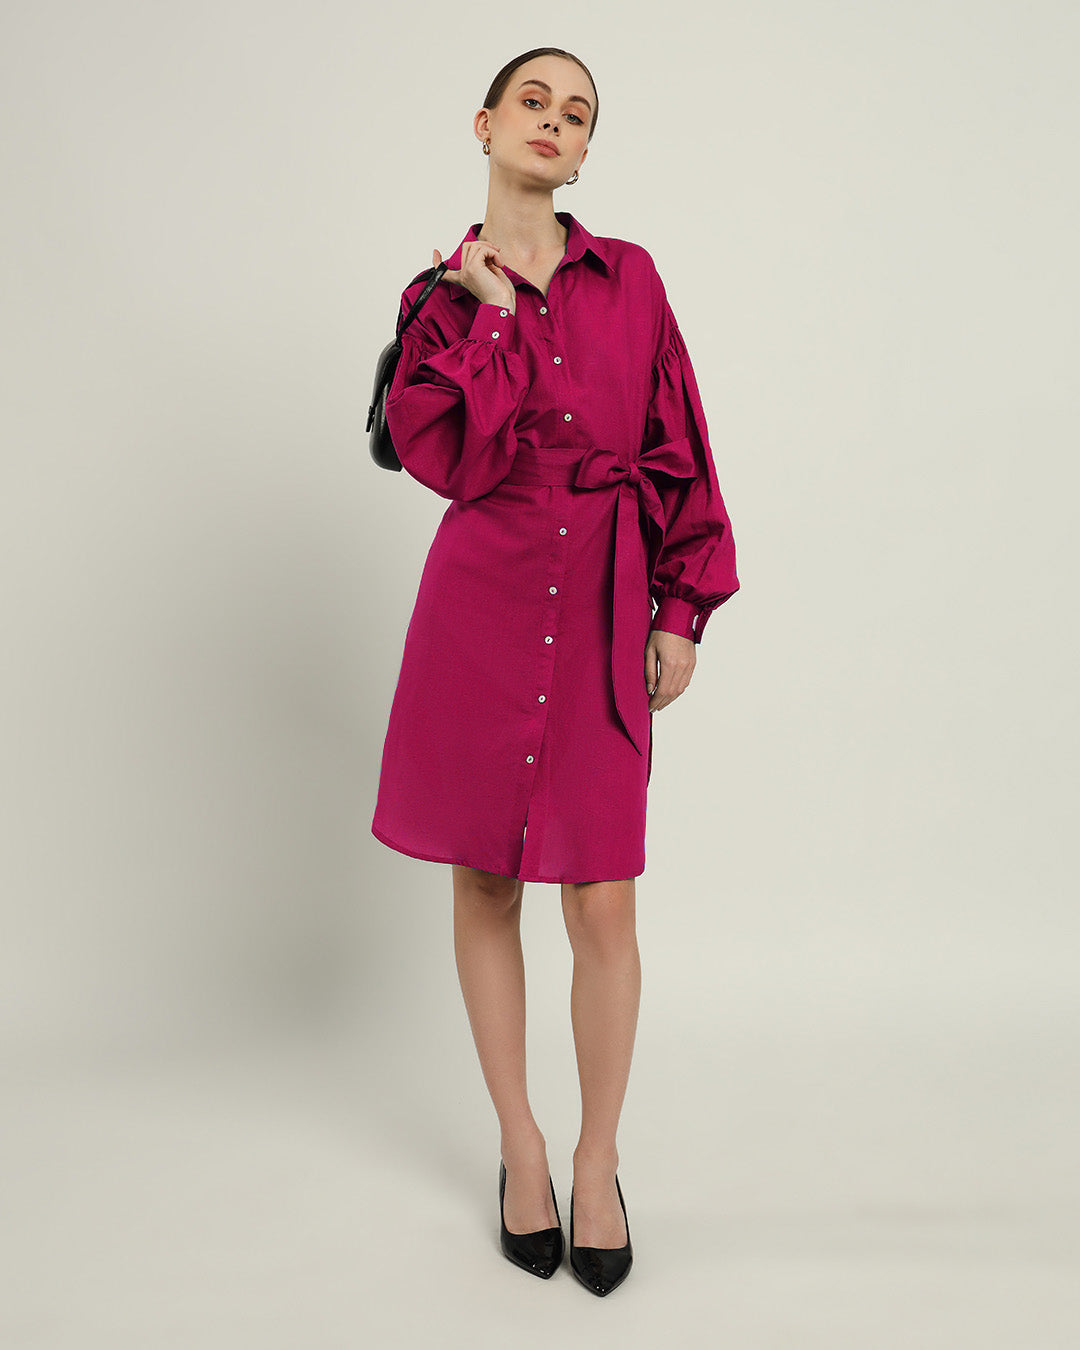 The Derby Berry Dress